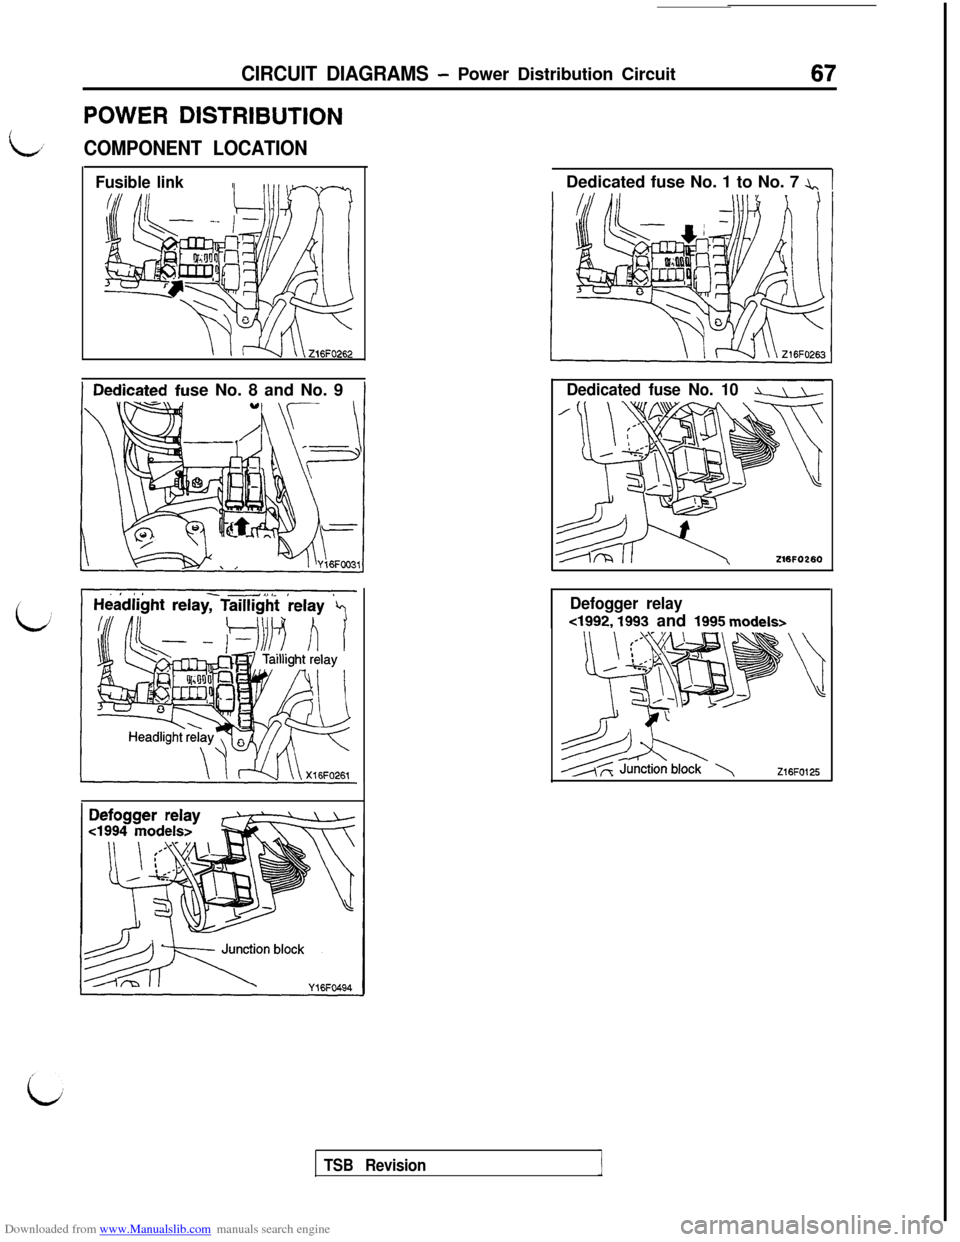 MITSUBISHI 3000GT 1996 2.G Repair Manual Downloaded from www.Manualslib.com manuals search engine CIRCUIT DIAGRAMS - Power Distribution Circuit67
POWER DISTRIBUTION
L,’COMPONENT LOCATION
Fusible linkse No. 8 and No. 9Dedicated fuse No. 1 t